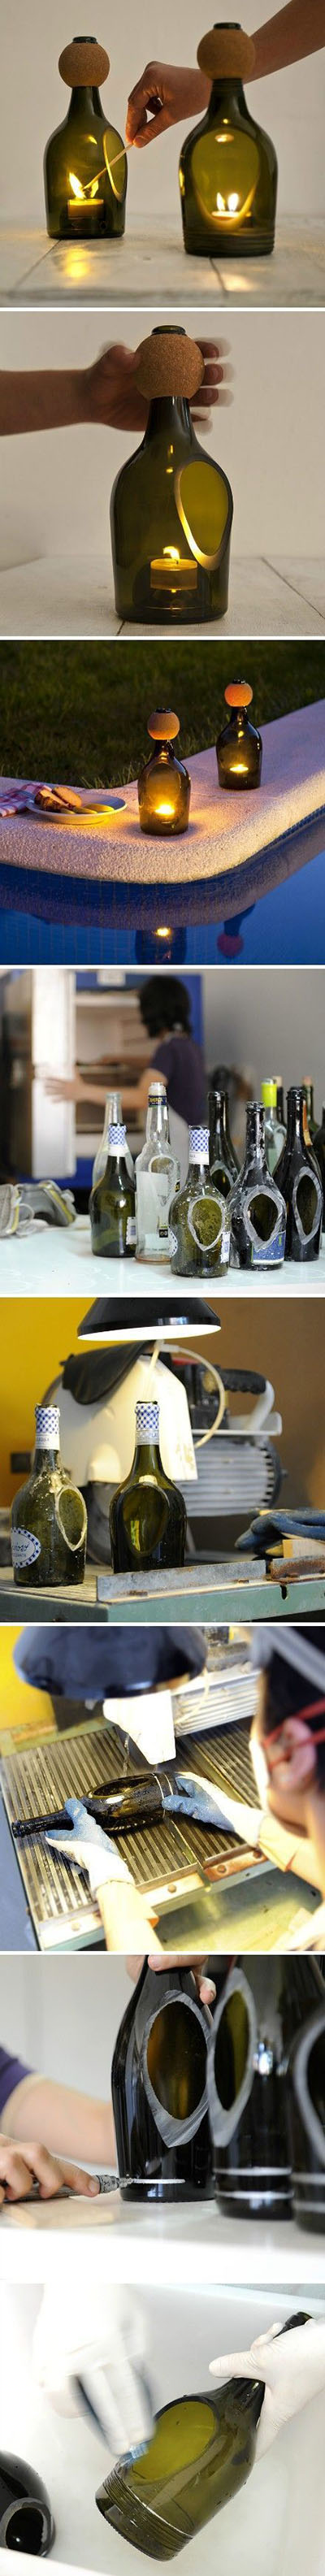 8  DIY Wine Bottles Crafts And Ideas063e